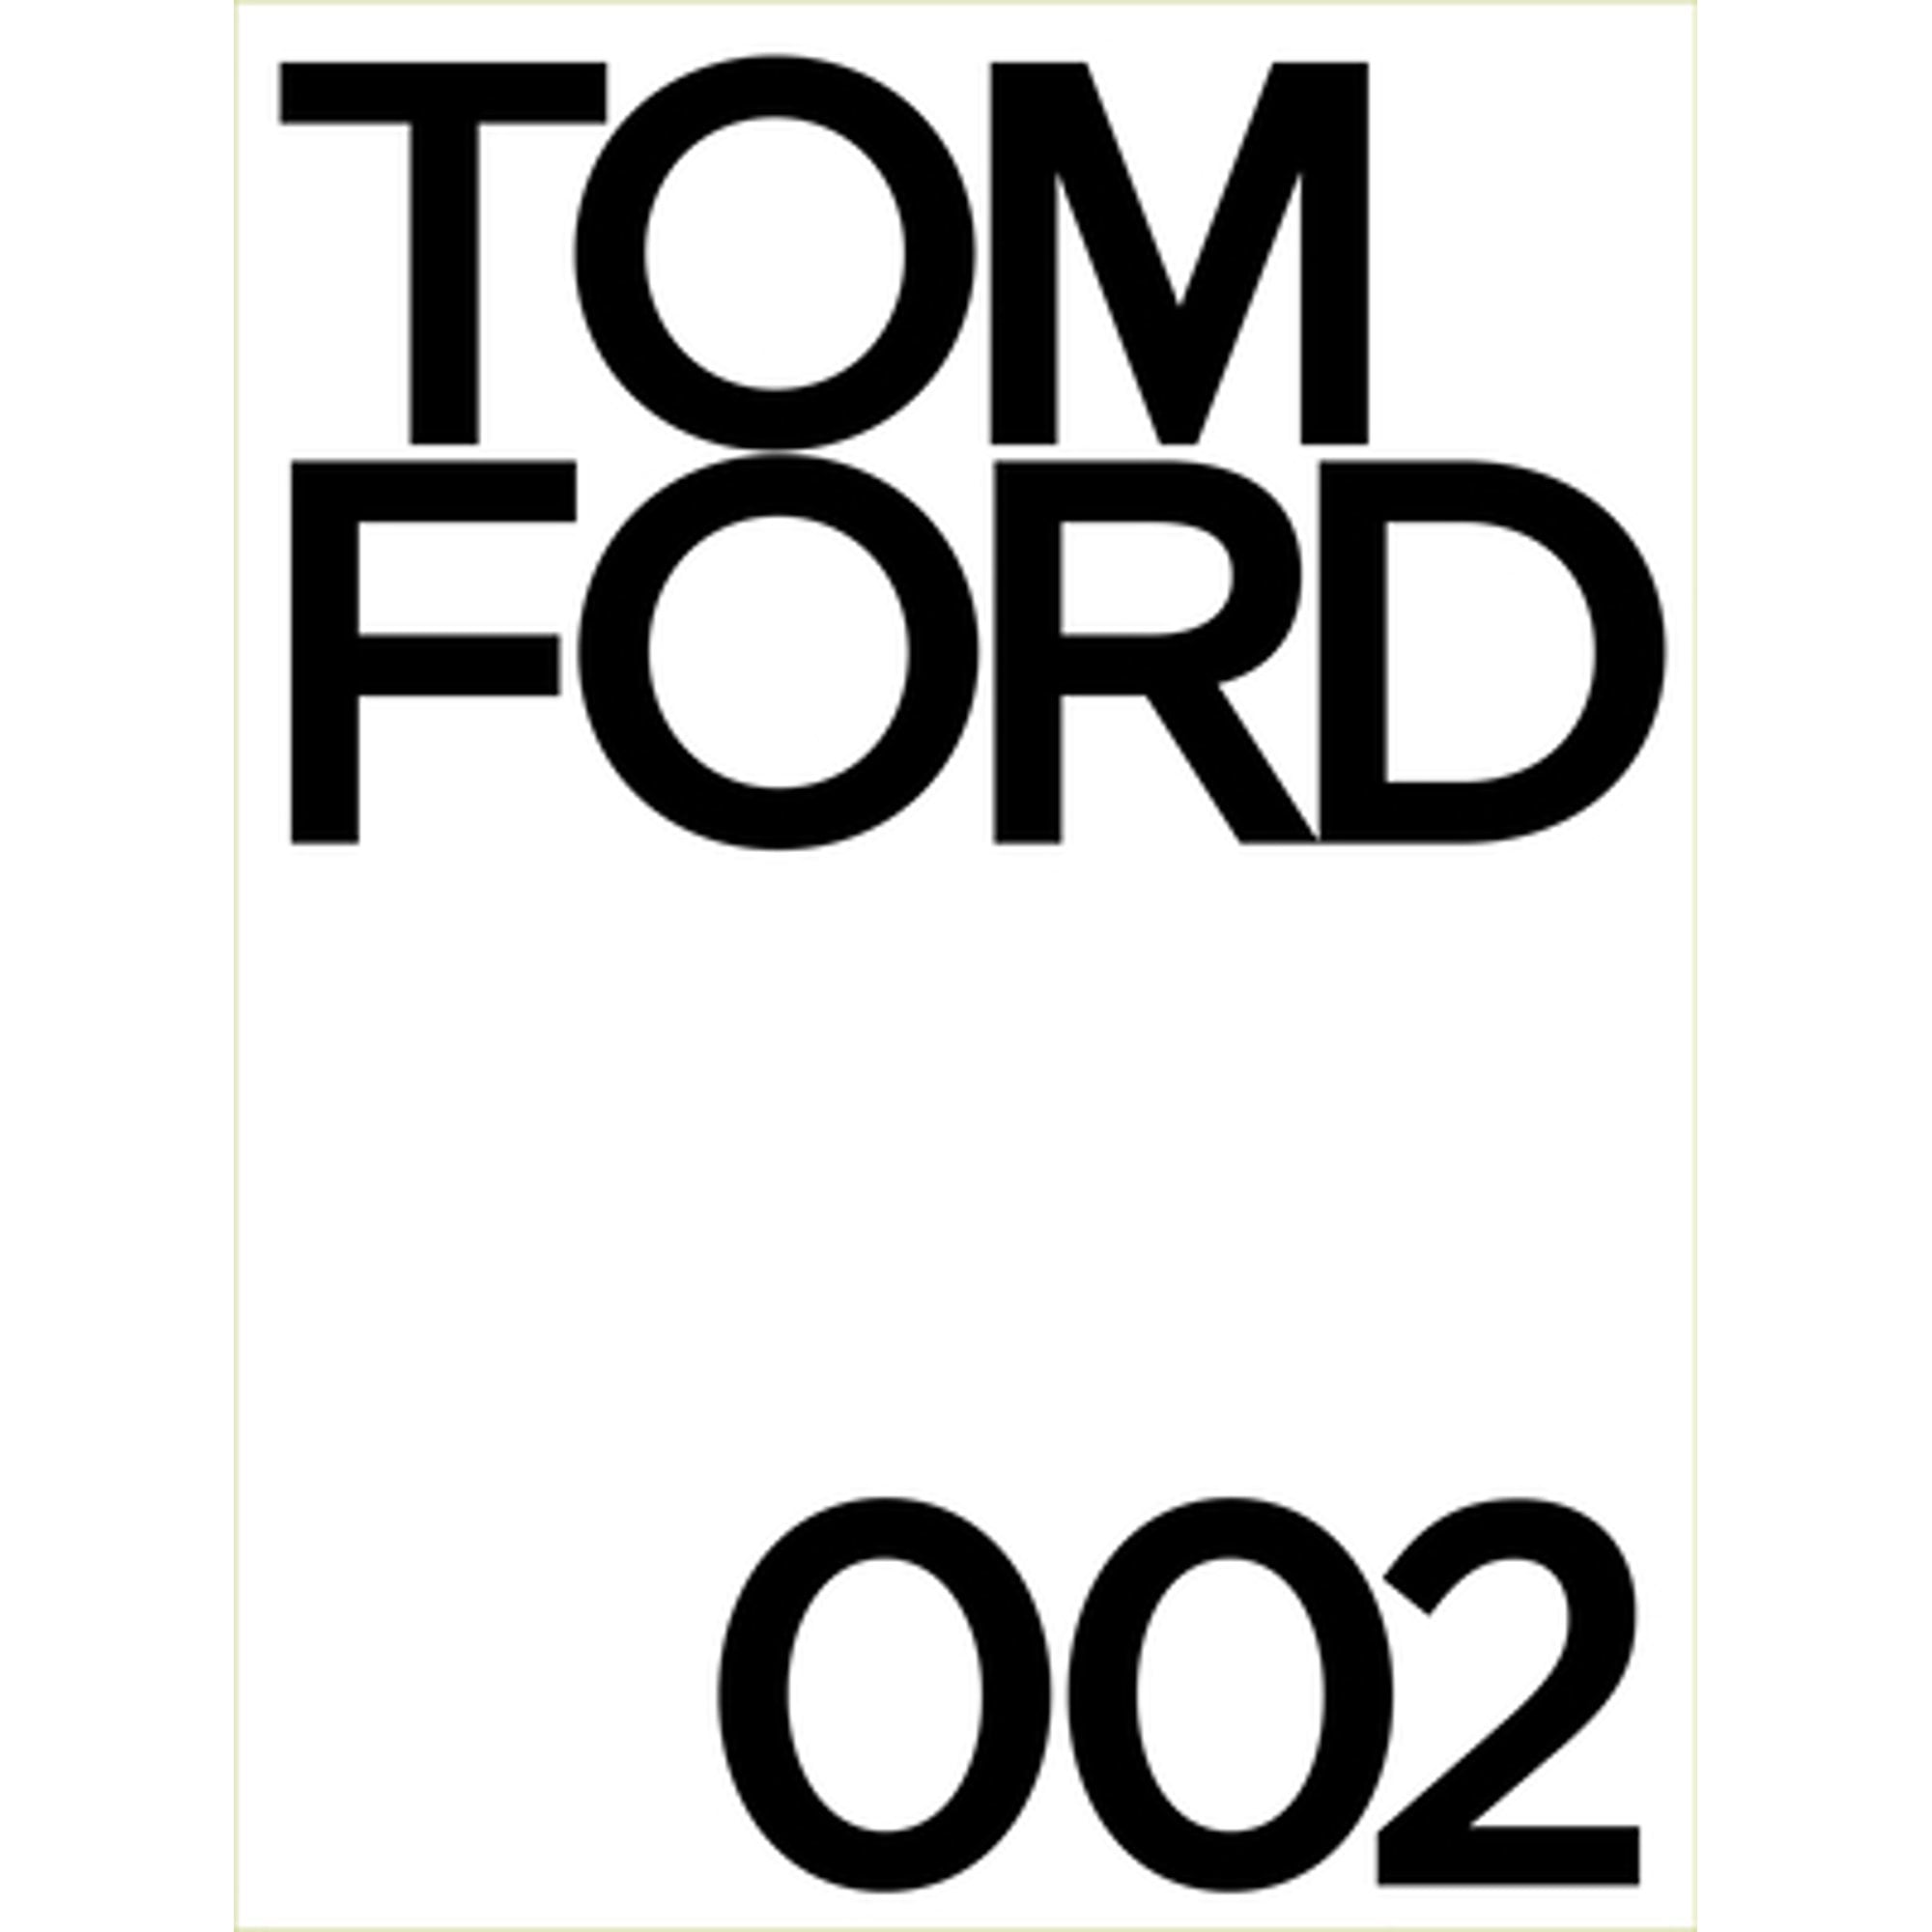 Pre-Owned Tom Ford 002 (Hardcover 9780847864379) by Ford, Bridget Foley